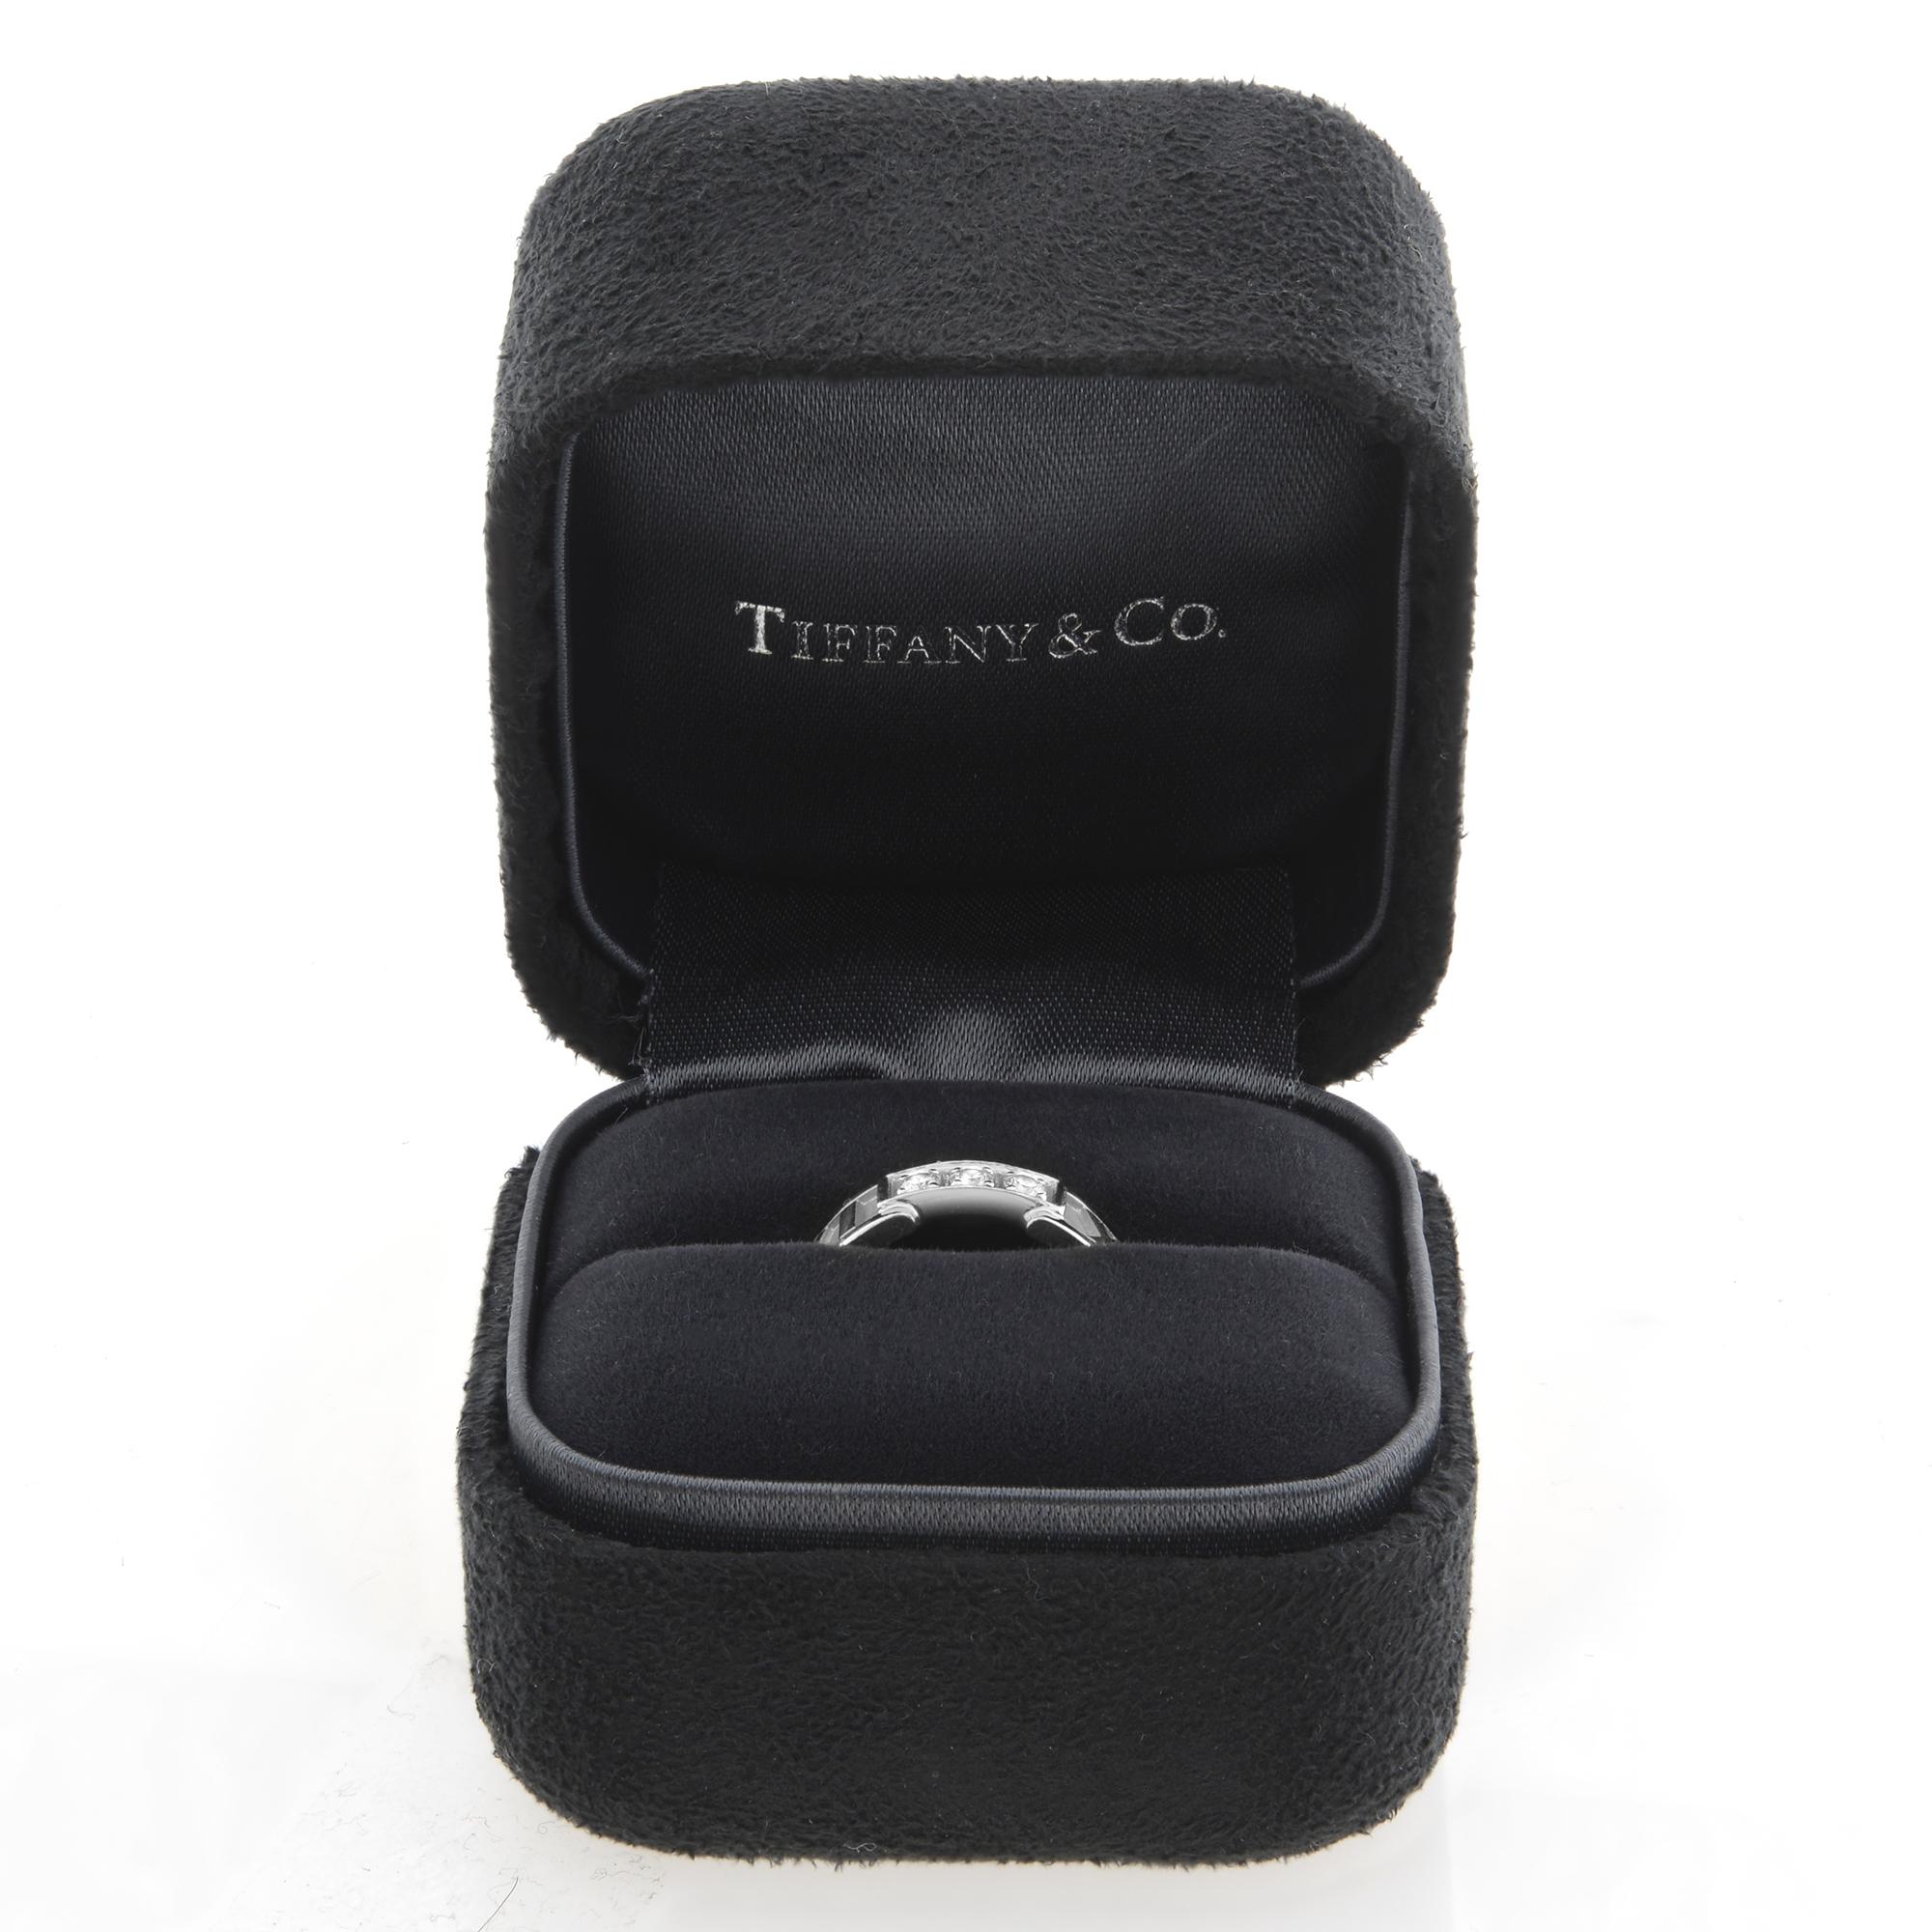 Tiffany & Co. Atlas 3 Diamond Ring 18K White Gold 0.15cttw In Excellent Condition For Sale In New York, NY